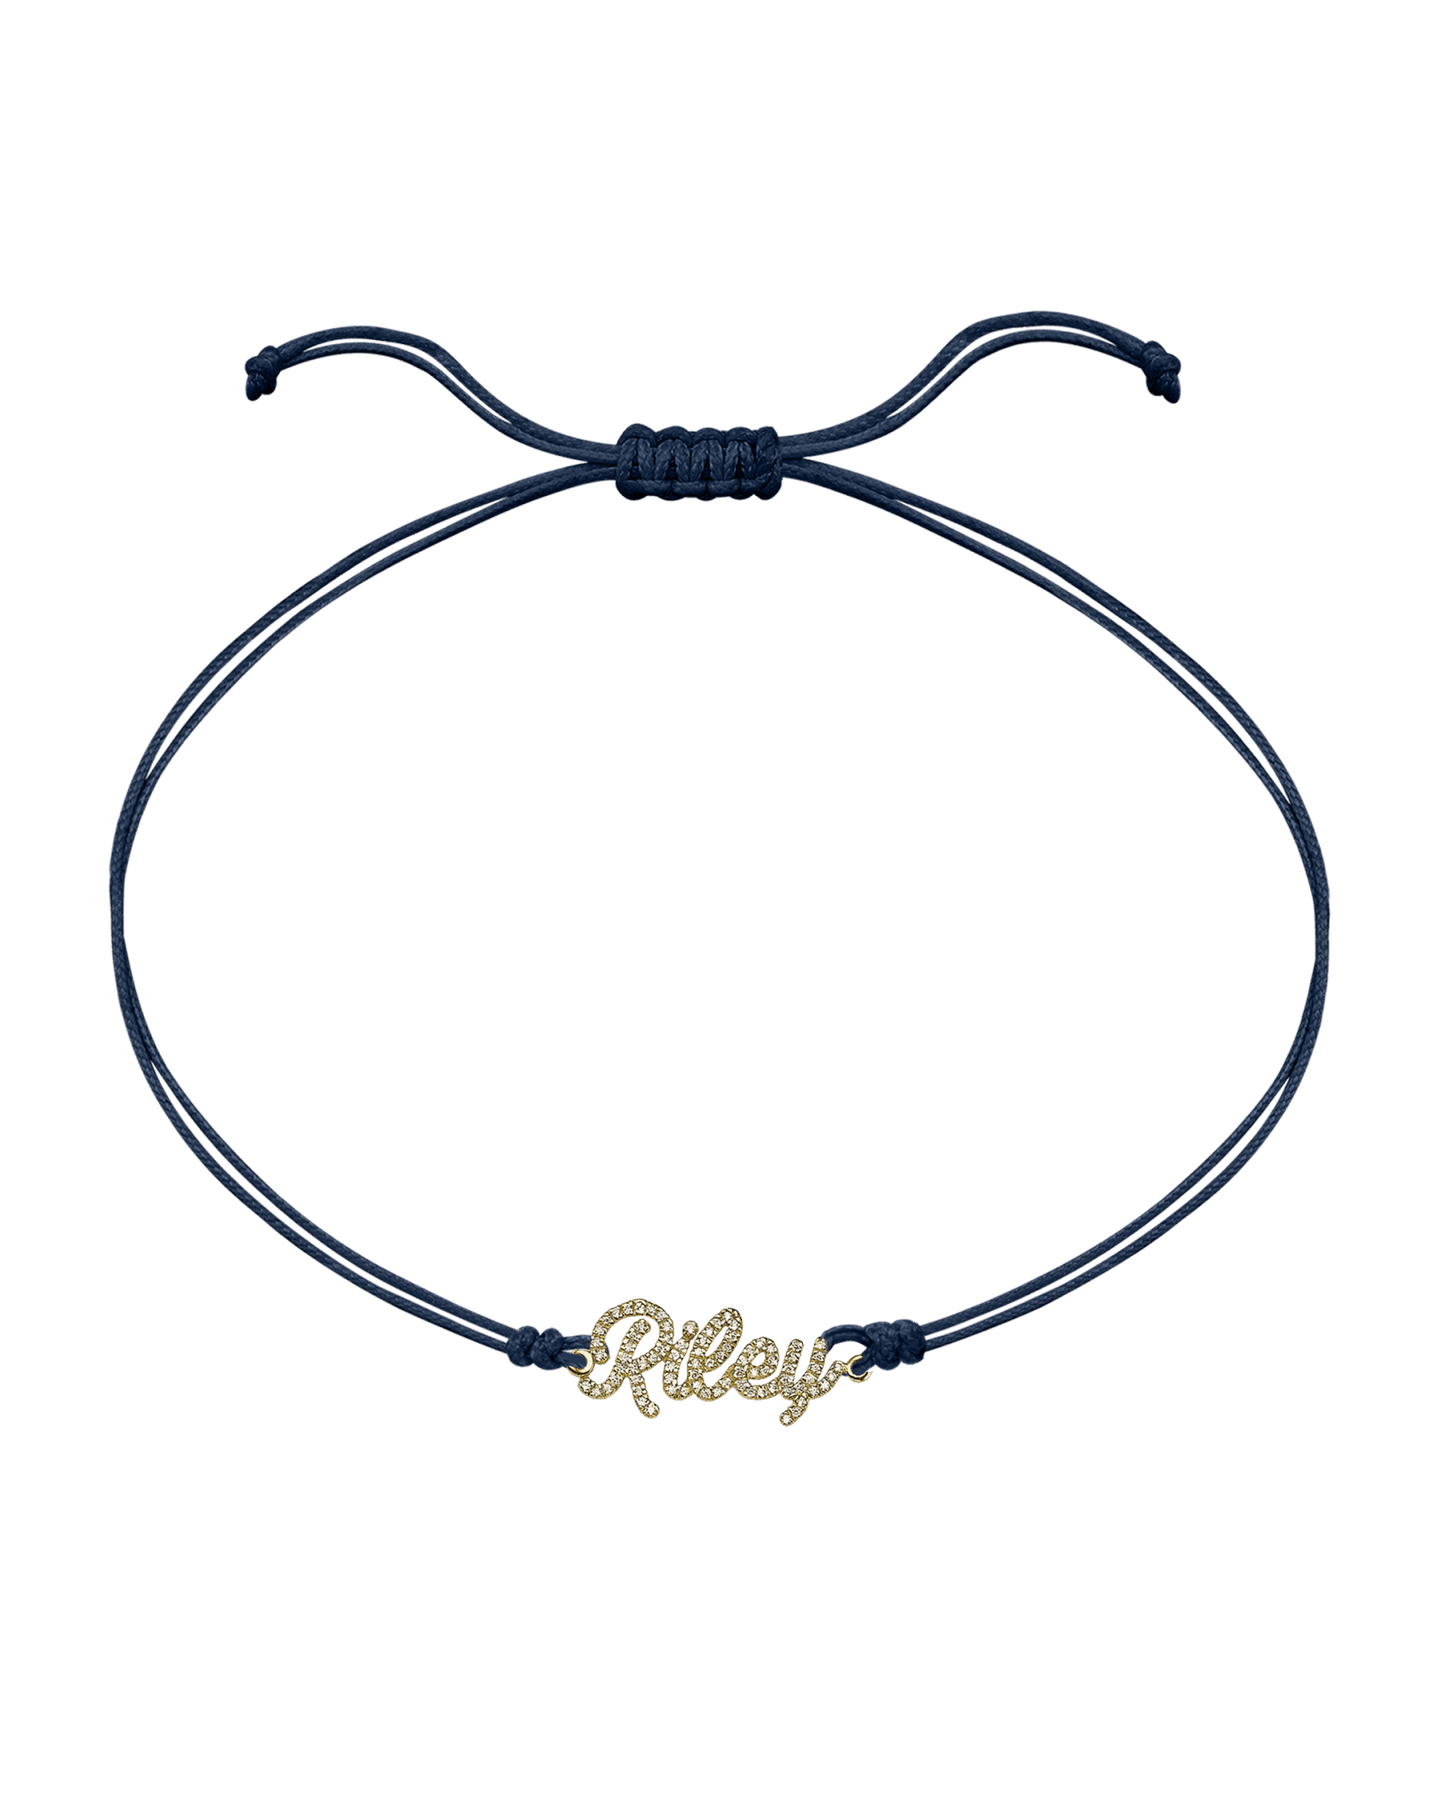 Paved Name Plate String of Love - 14K Yellow Gold Bracelet 14K Solid Gold Navy Blue 1 